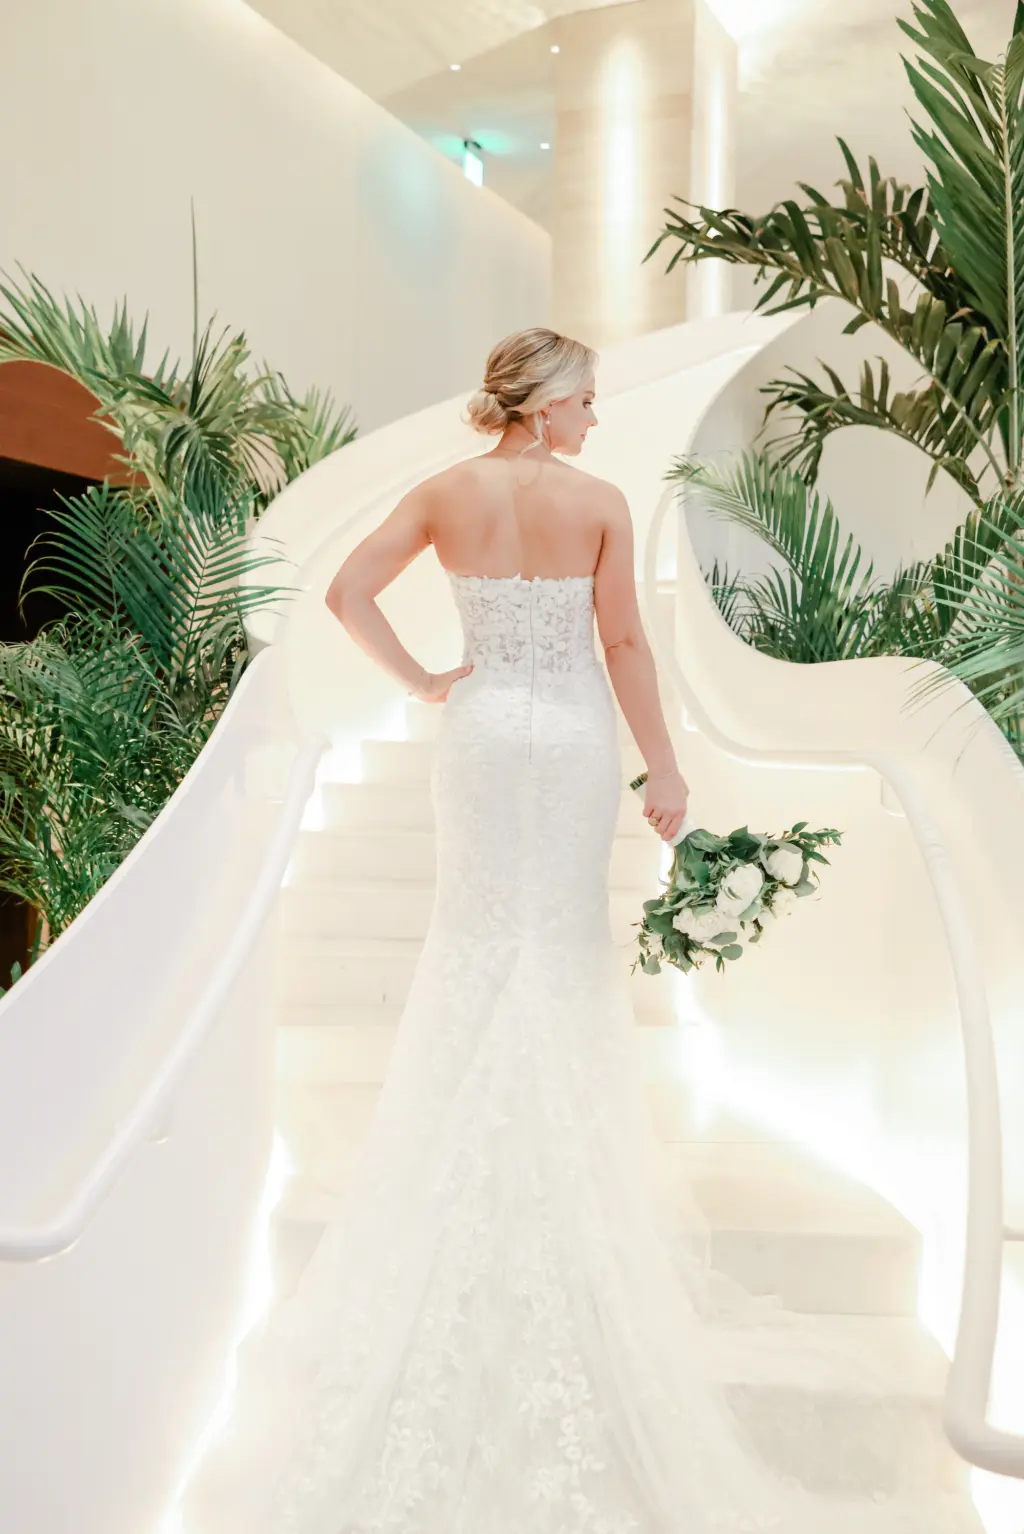 Elegant Wedding Hair and Makeup Inspiration | Low Bridal Bun Chignon Ideas | Strapless White Floral Applique Pronovias Mermaid Wedding Dress with Cathedral Length Train | Downtown Event Venue The Edition Hotel Tampa Water Street Lobby Staircase | Bridal Portrait Inspiration